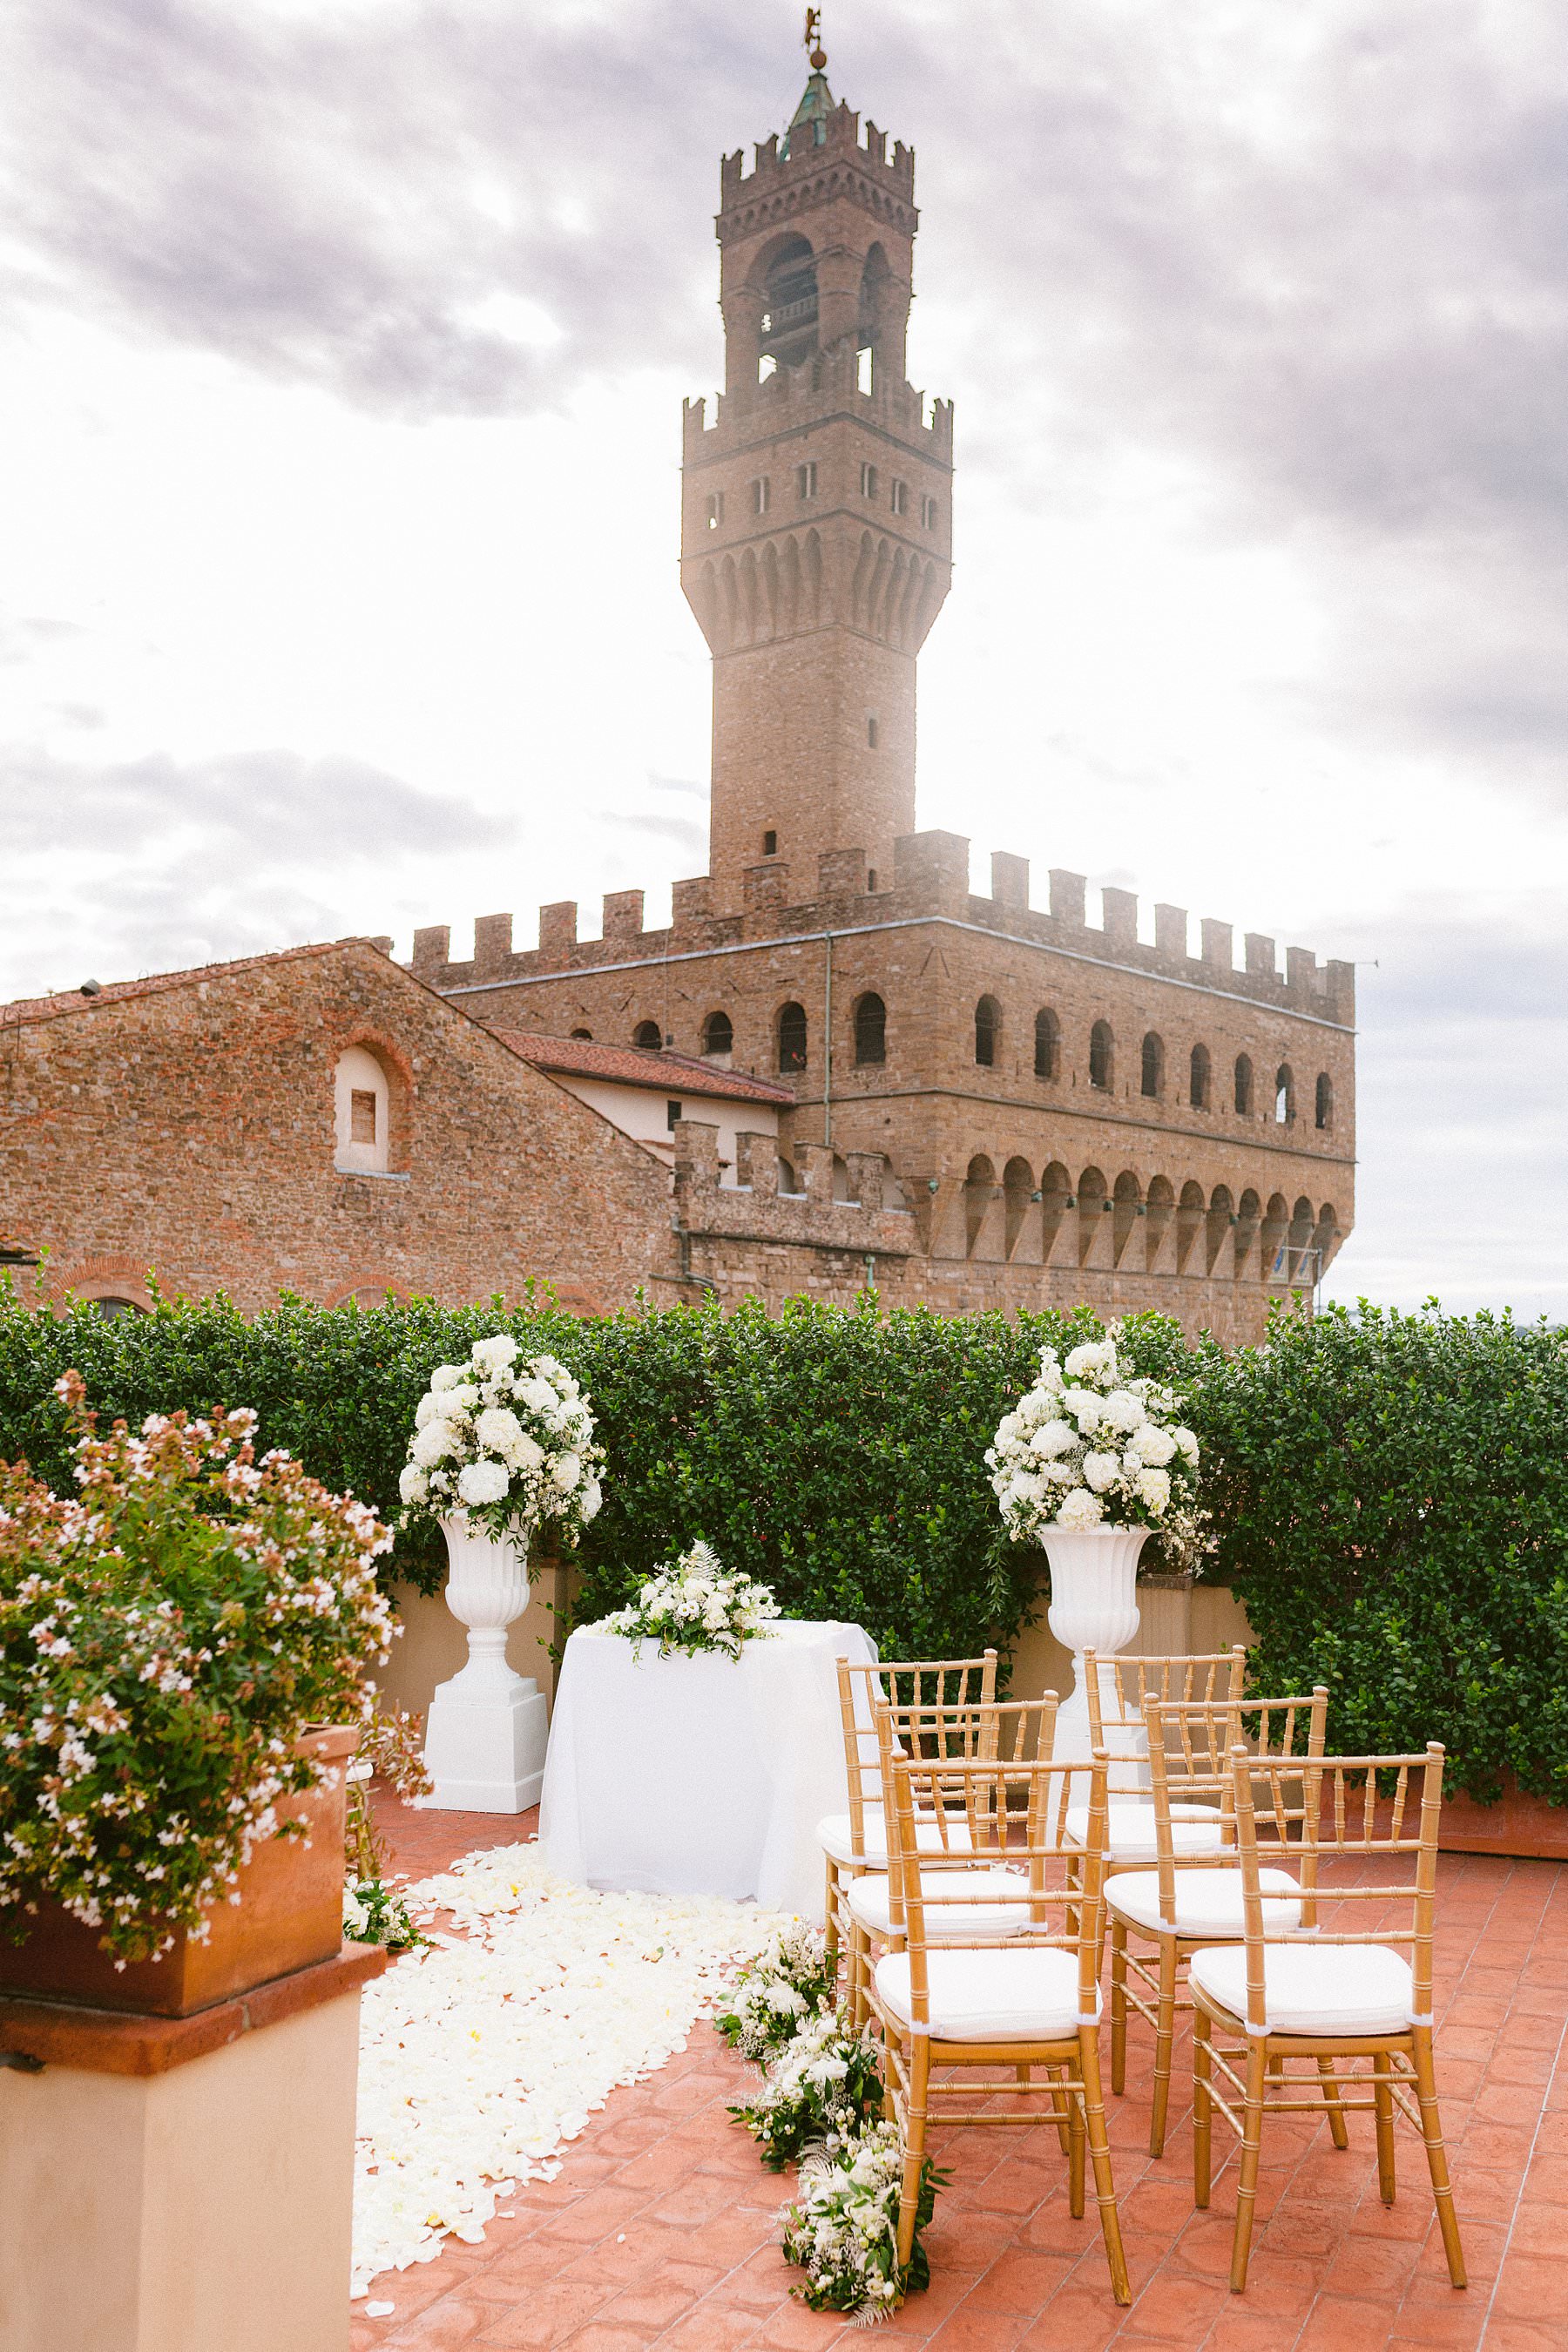 Intimate exquisite wedding in the heart of Florence, Italy. Gorgeous real wedding ceremony decors at Palazzo Gondi, one of the most renowned Renaissance palaces in Florence, and it’s open to guests only on special occasions. A real hidden treasure located in the very heart of the historical center, next to Palazzo della Signoria. It’s no surprise that the terrace – that hosted the wedding ceremony – offers an incredible view of the Duomo and Palazzo Vecchio